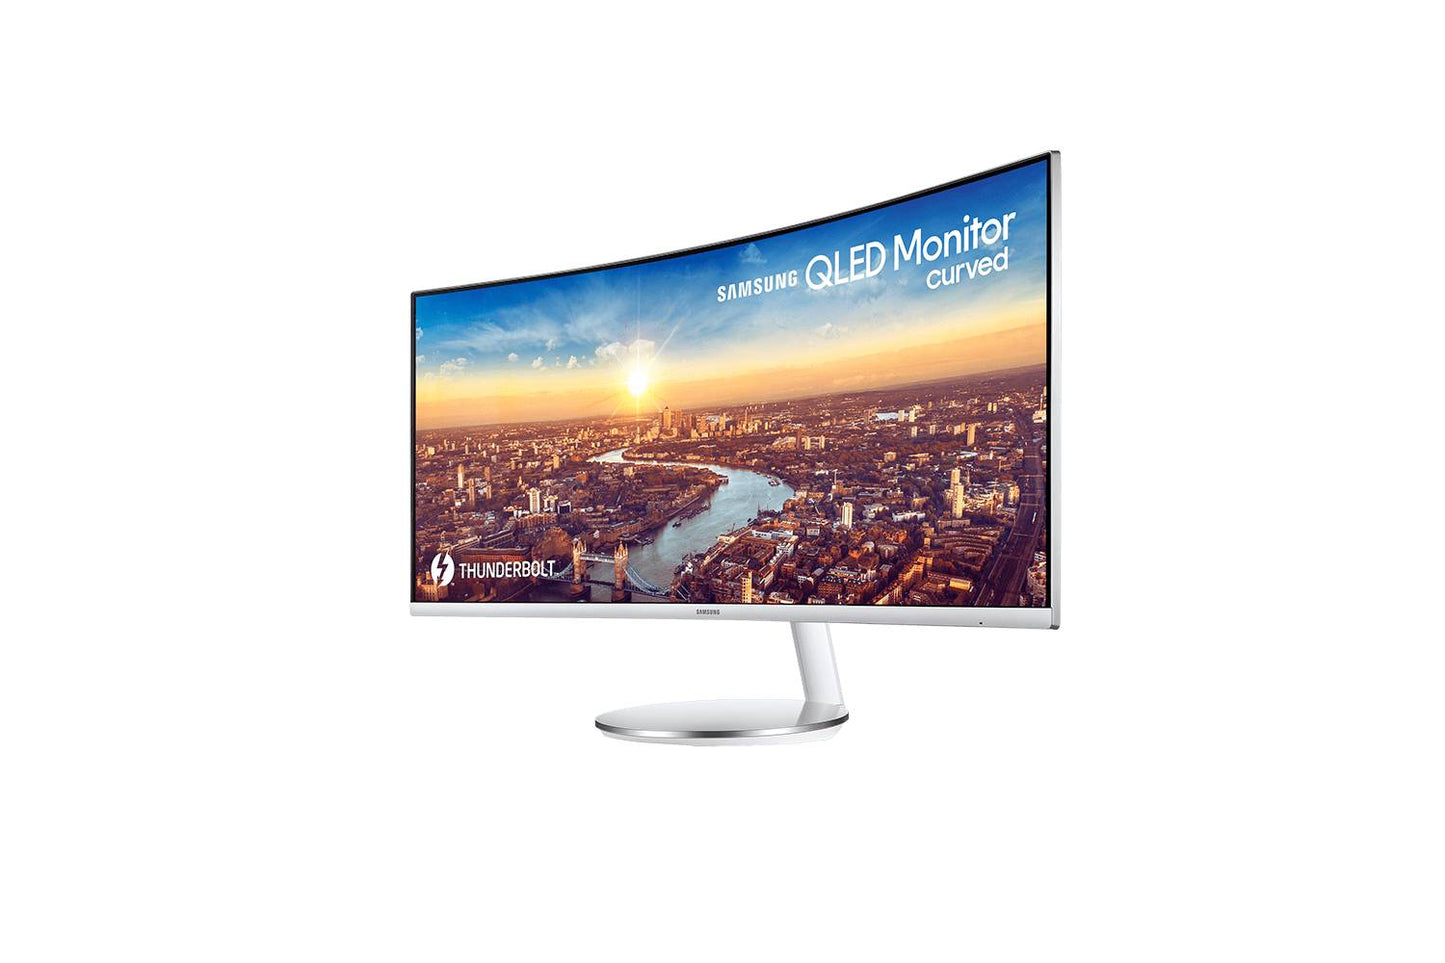 Samsung C34J79 34" Thunderbolt 3 Curved Monitor with 21:9 Wide Screen.